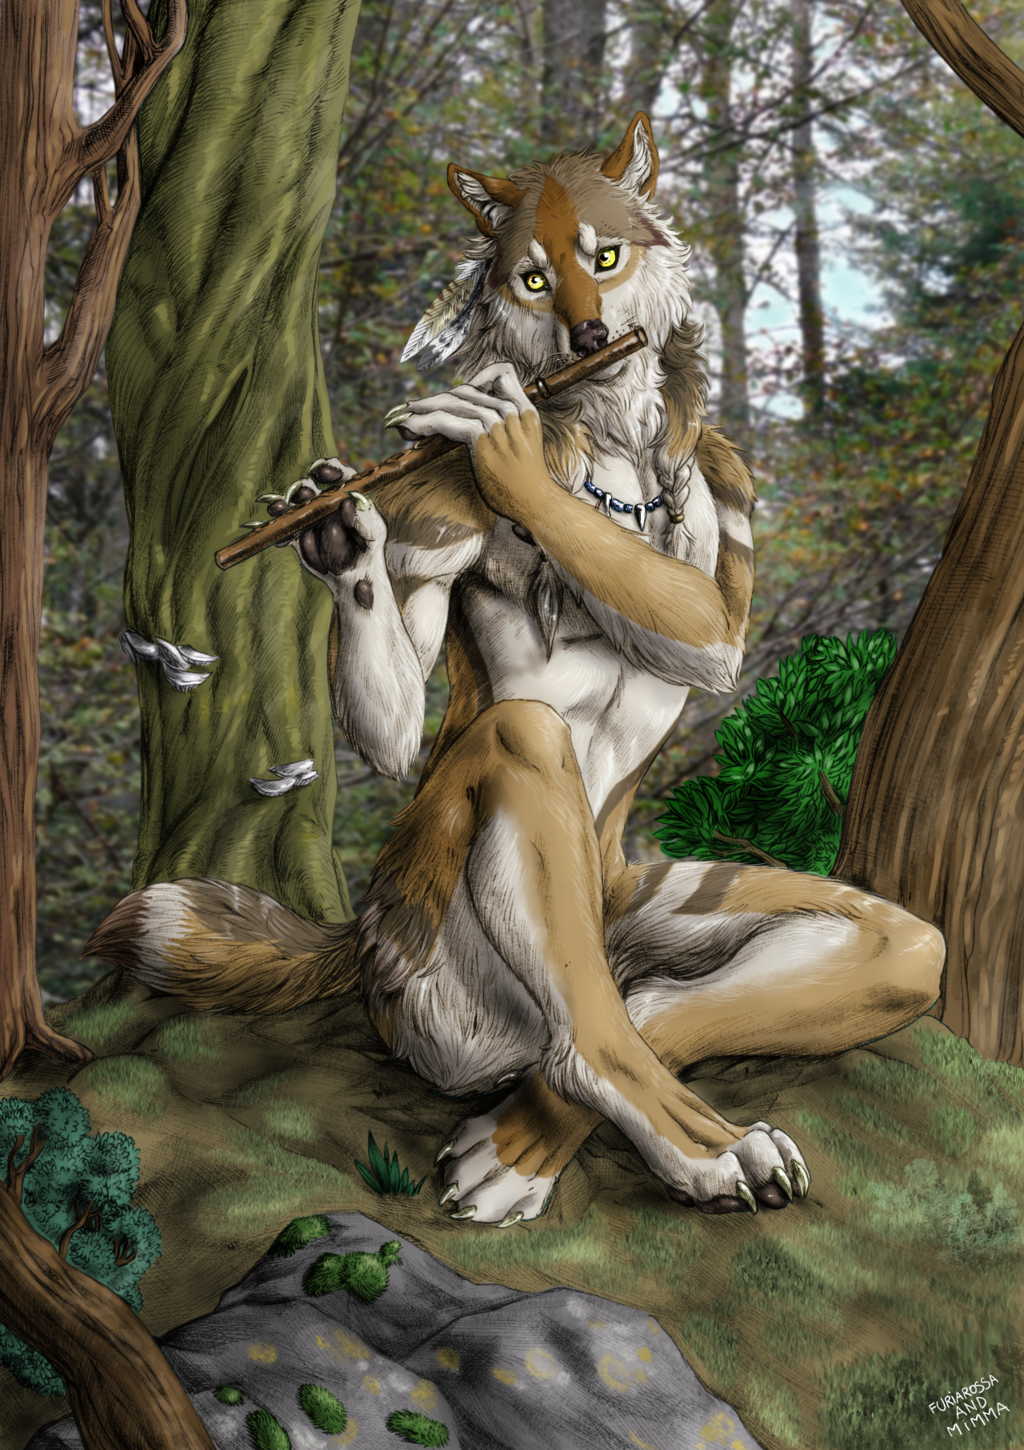 Commission - The flute player